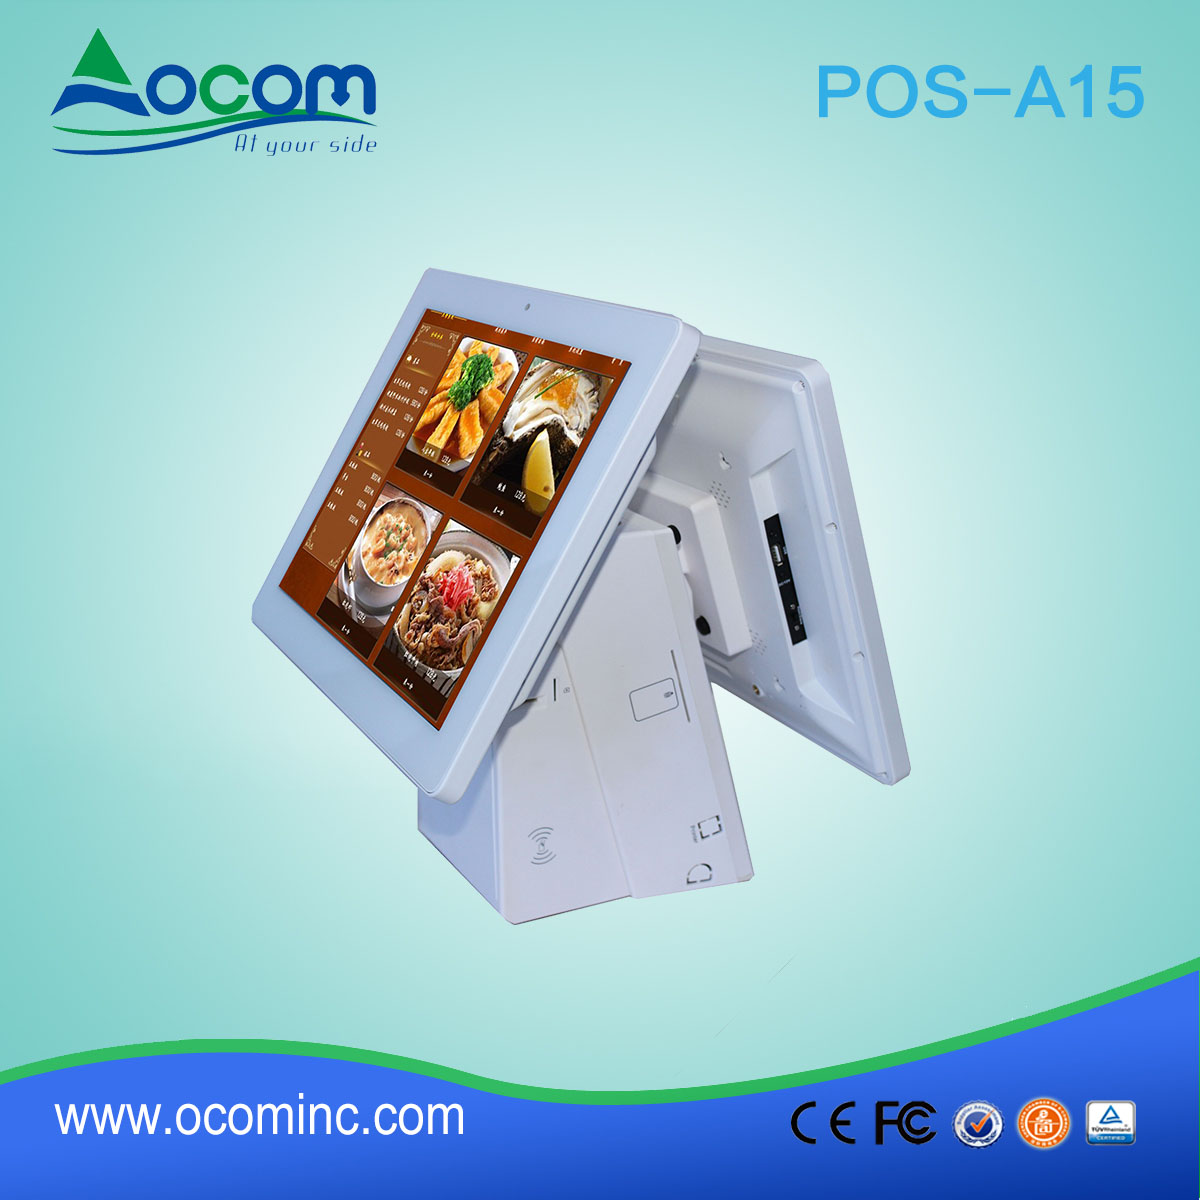 POS-A15----2017 hot selling cheap pos system with thermal printer 15.6"